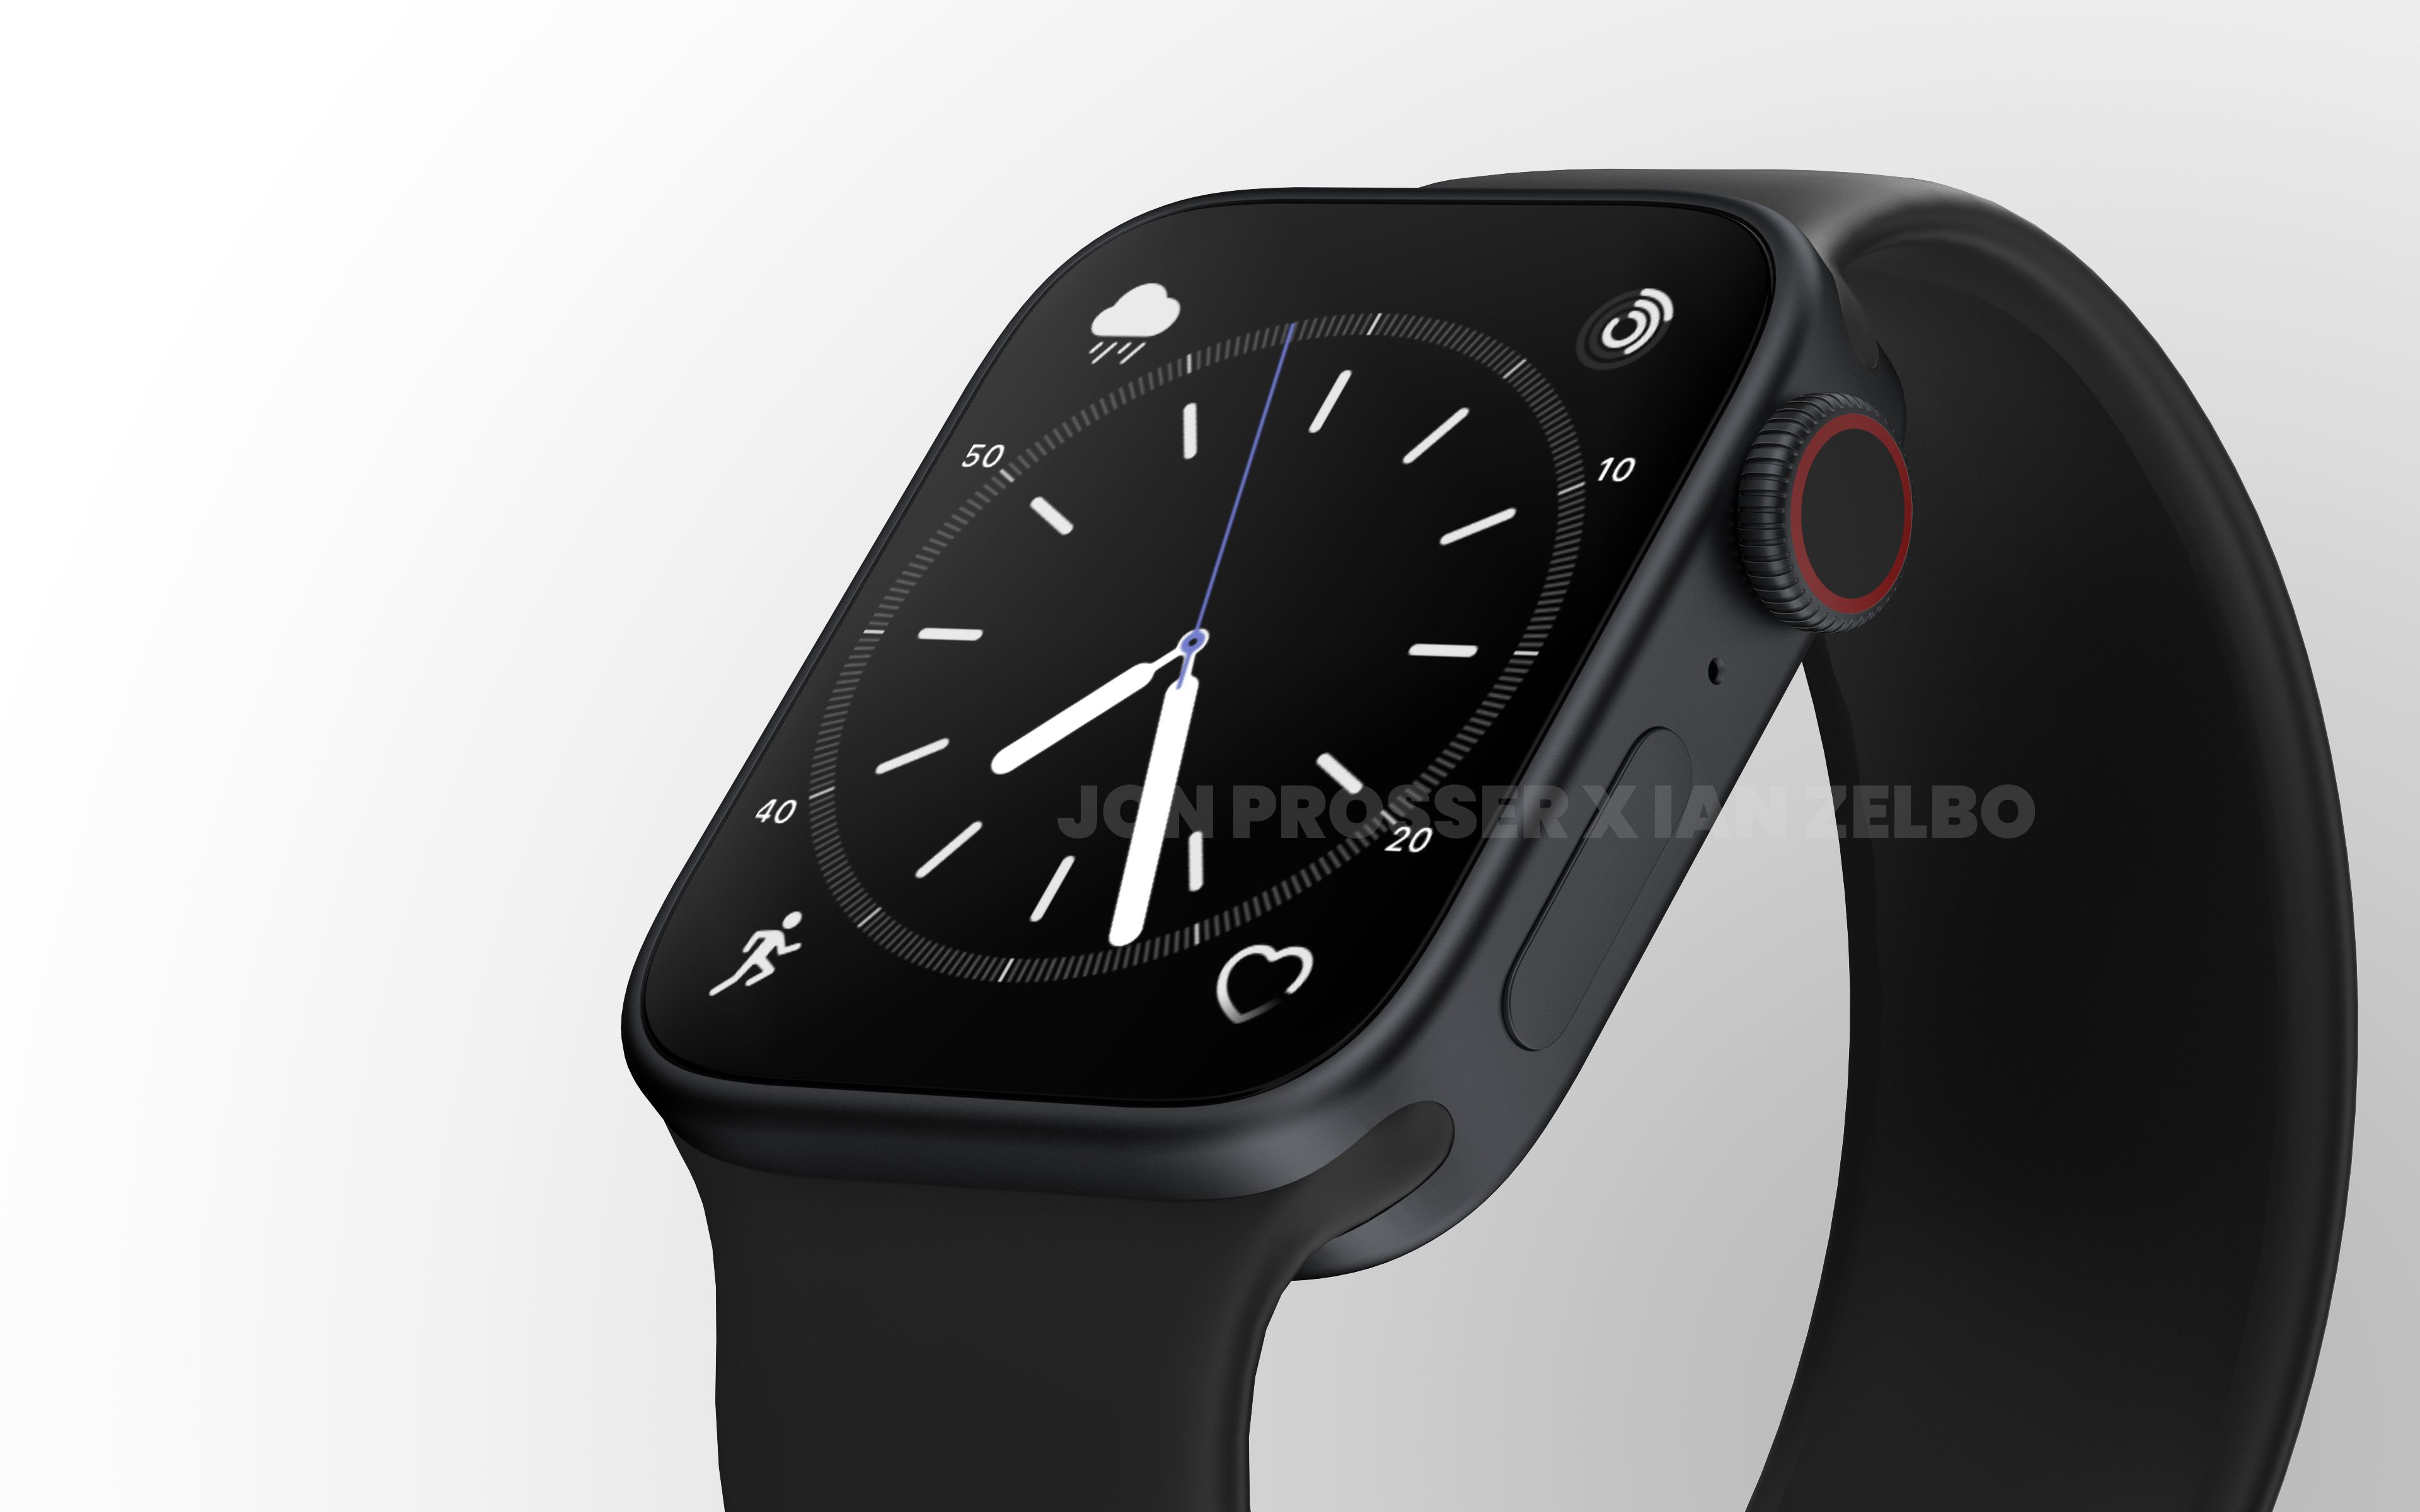 Apple Watch Series 8 Rumored to Feature New Design With Flat Display